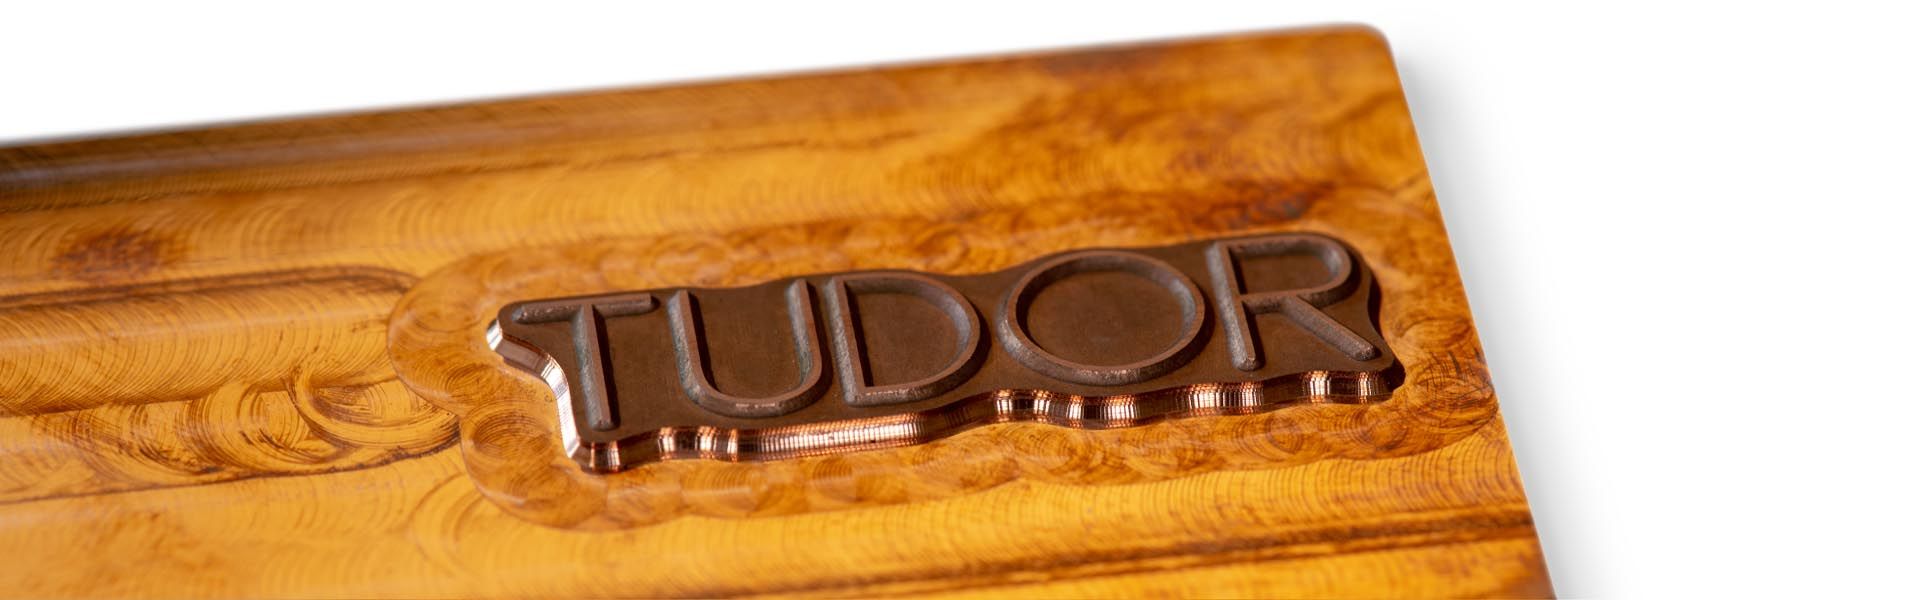 the word tudor is milled out of a piece of copper as an embossing die